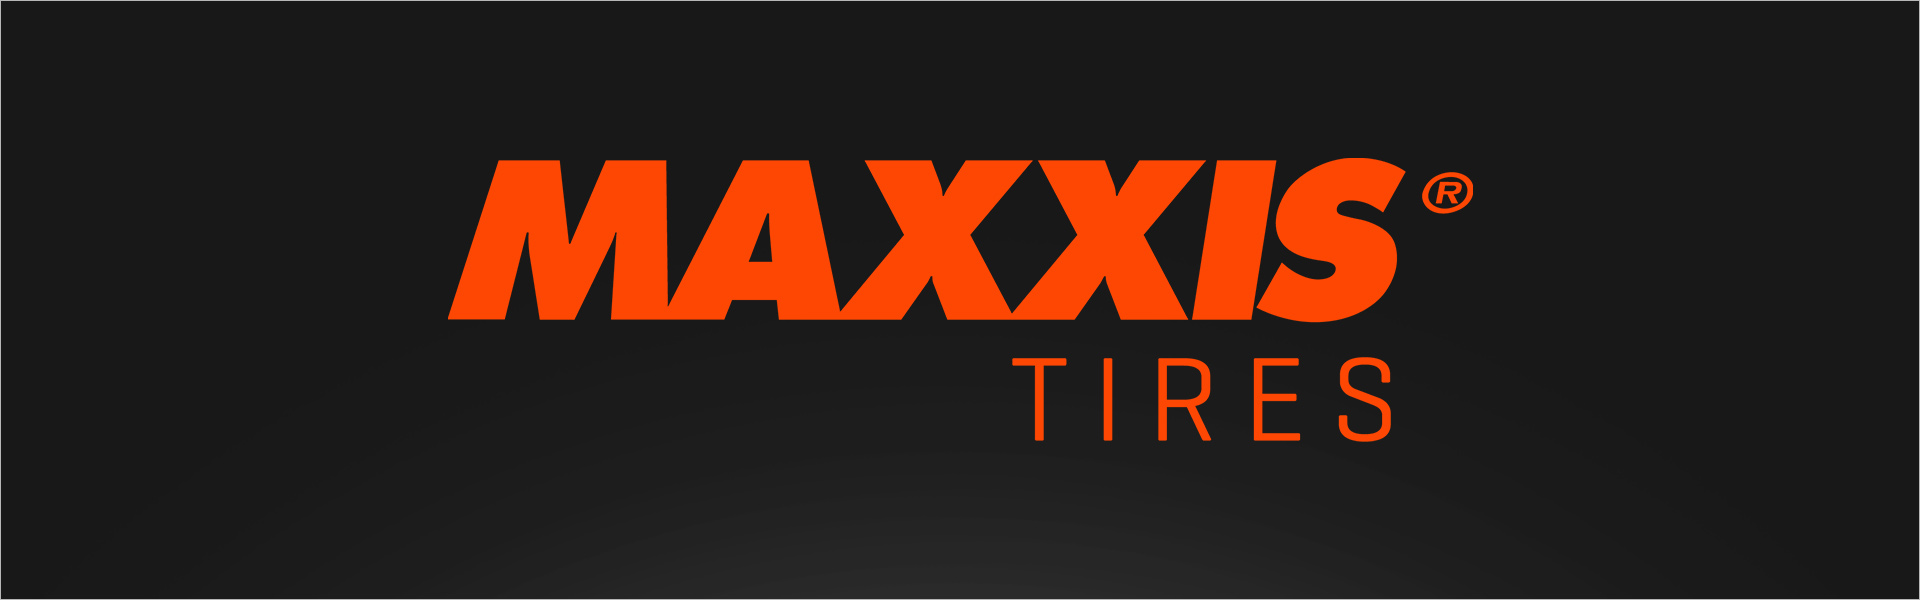 Maxxis Me3 Maxxis